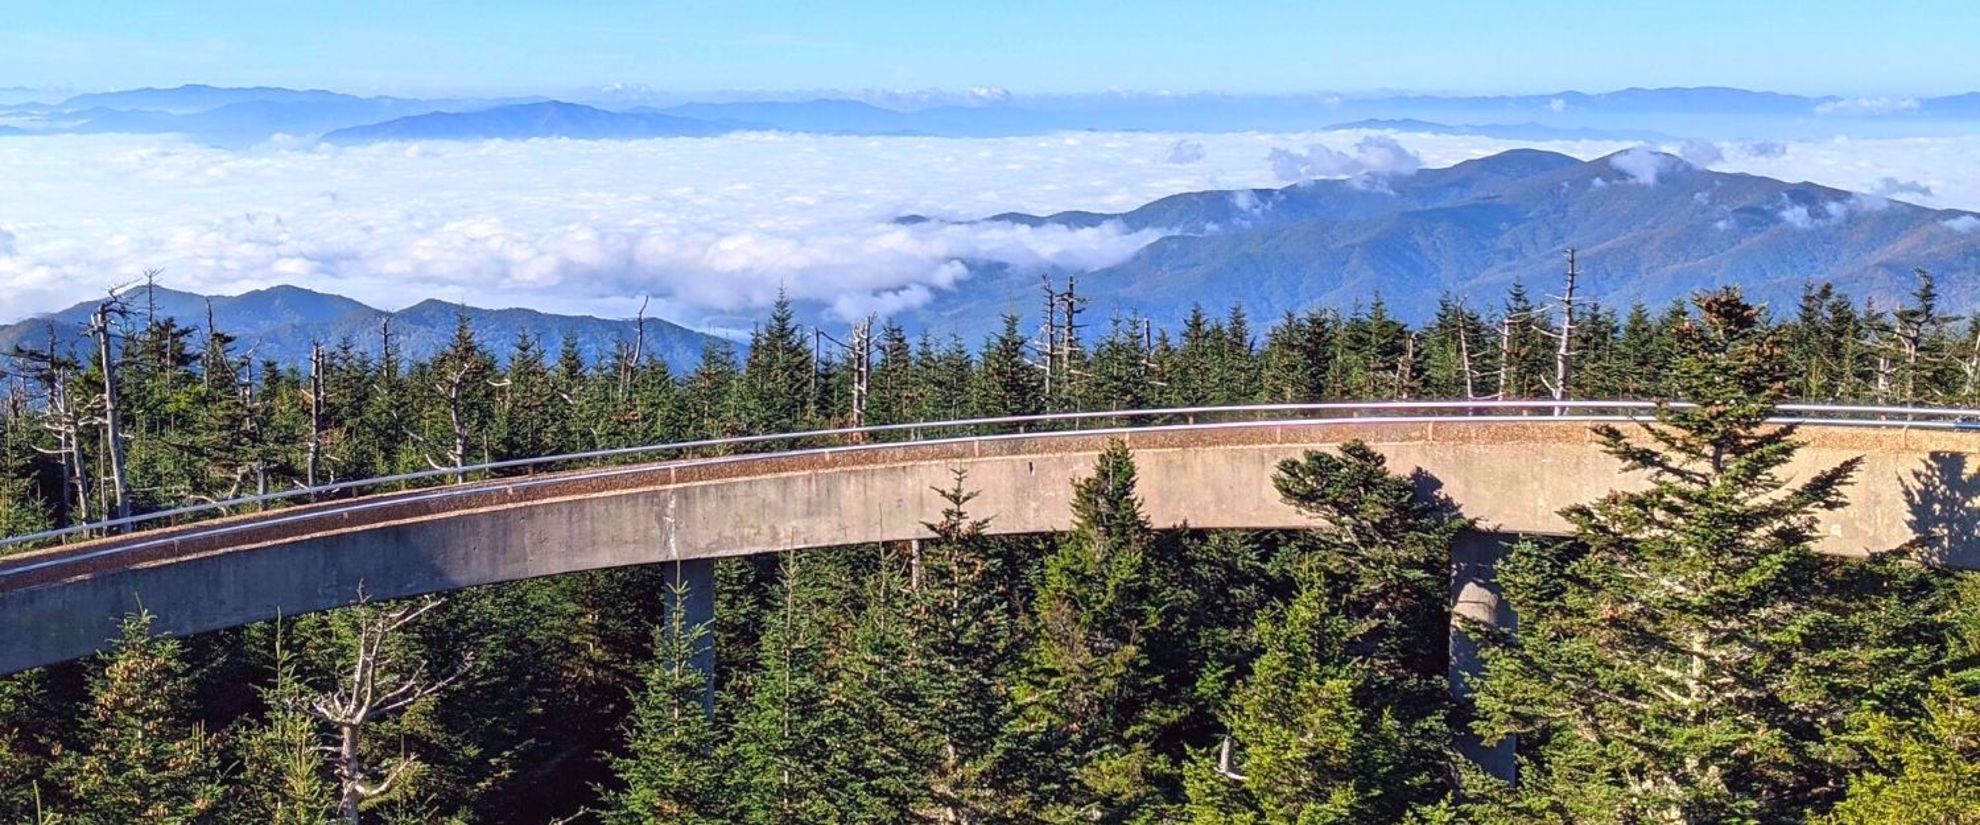 group travel to clingman's dome